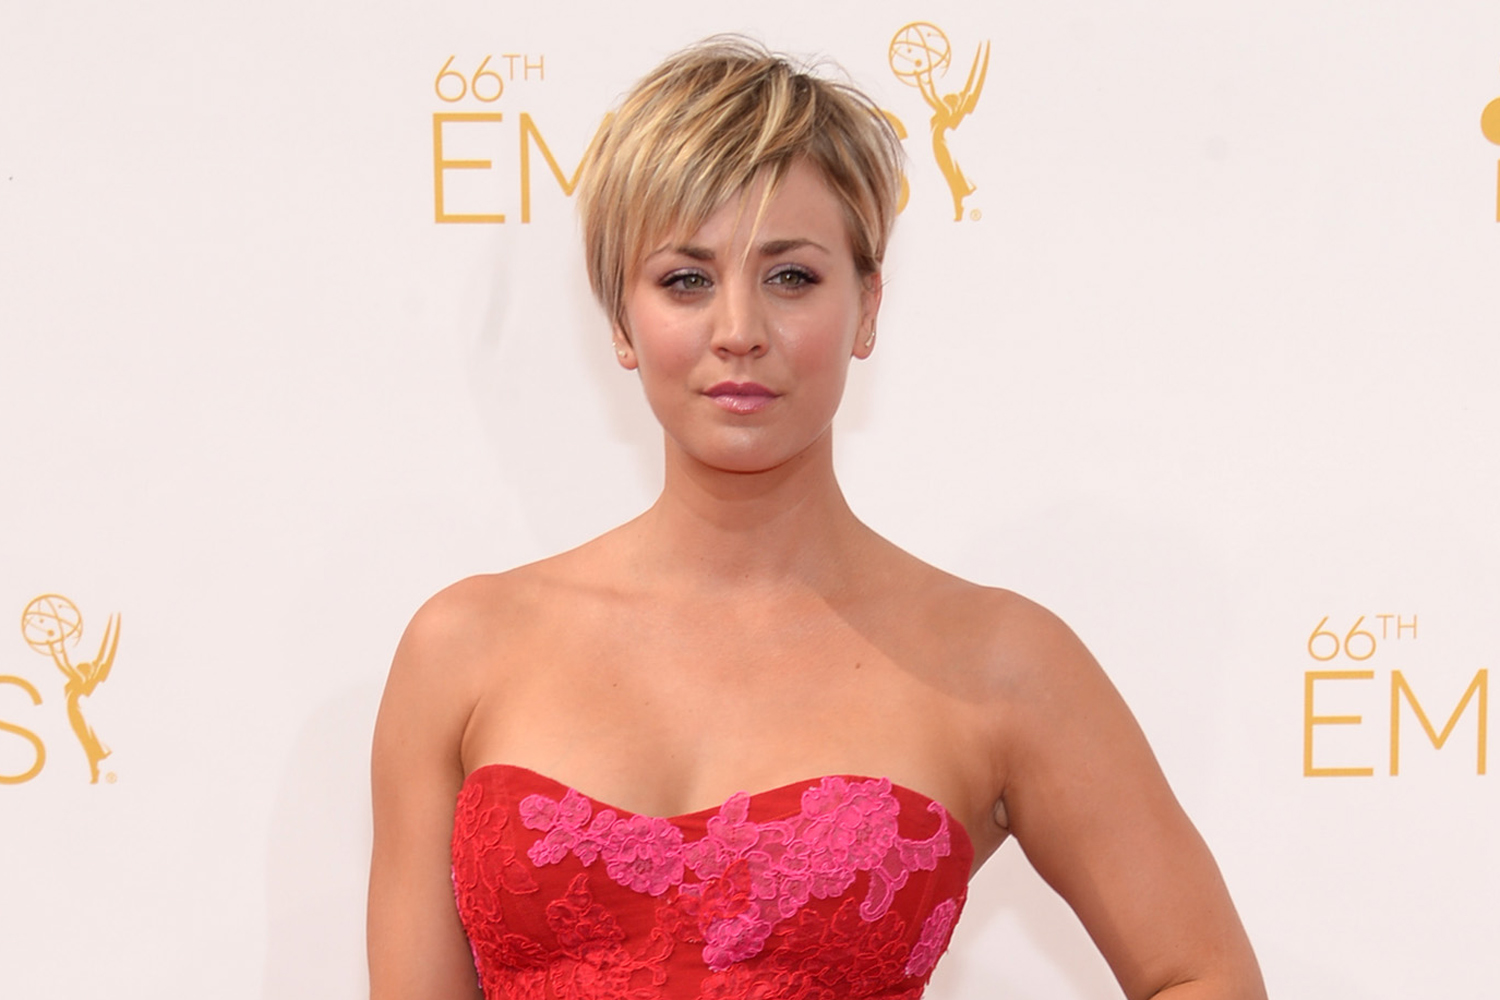 dave khoo recommends kaley cuoco porn fake pic